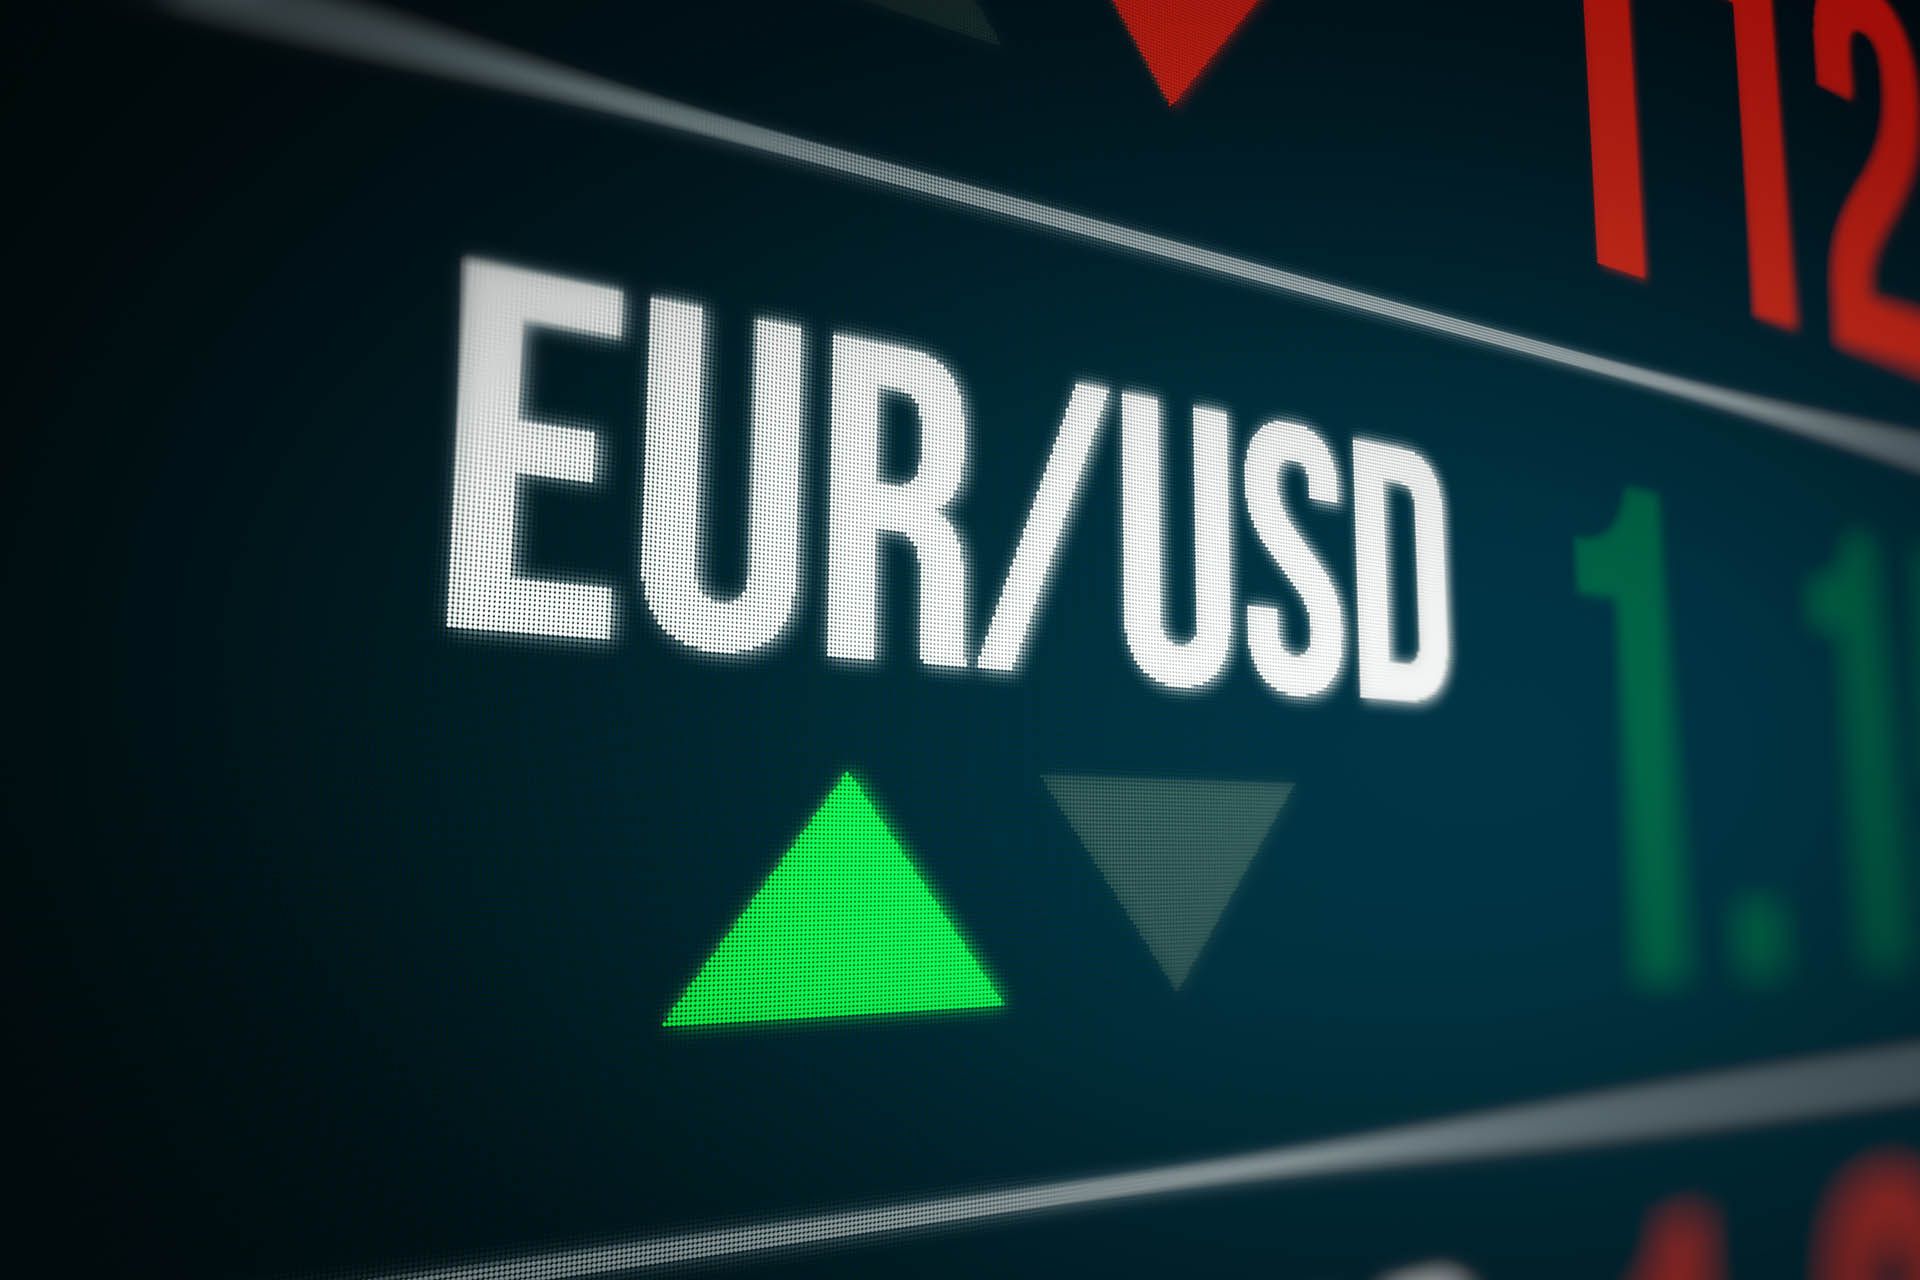 EUR to USD rate forecast